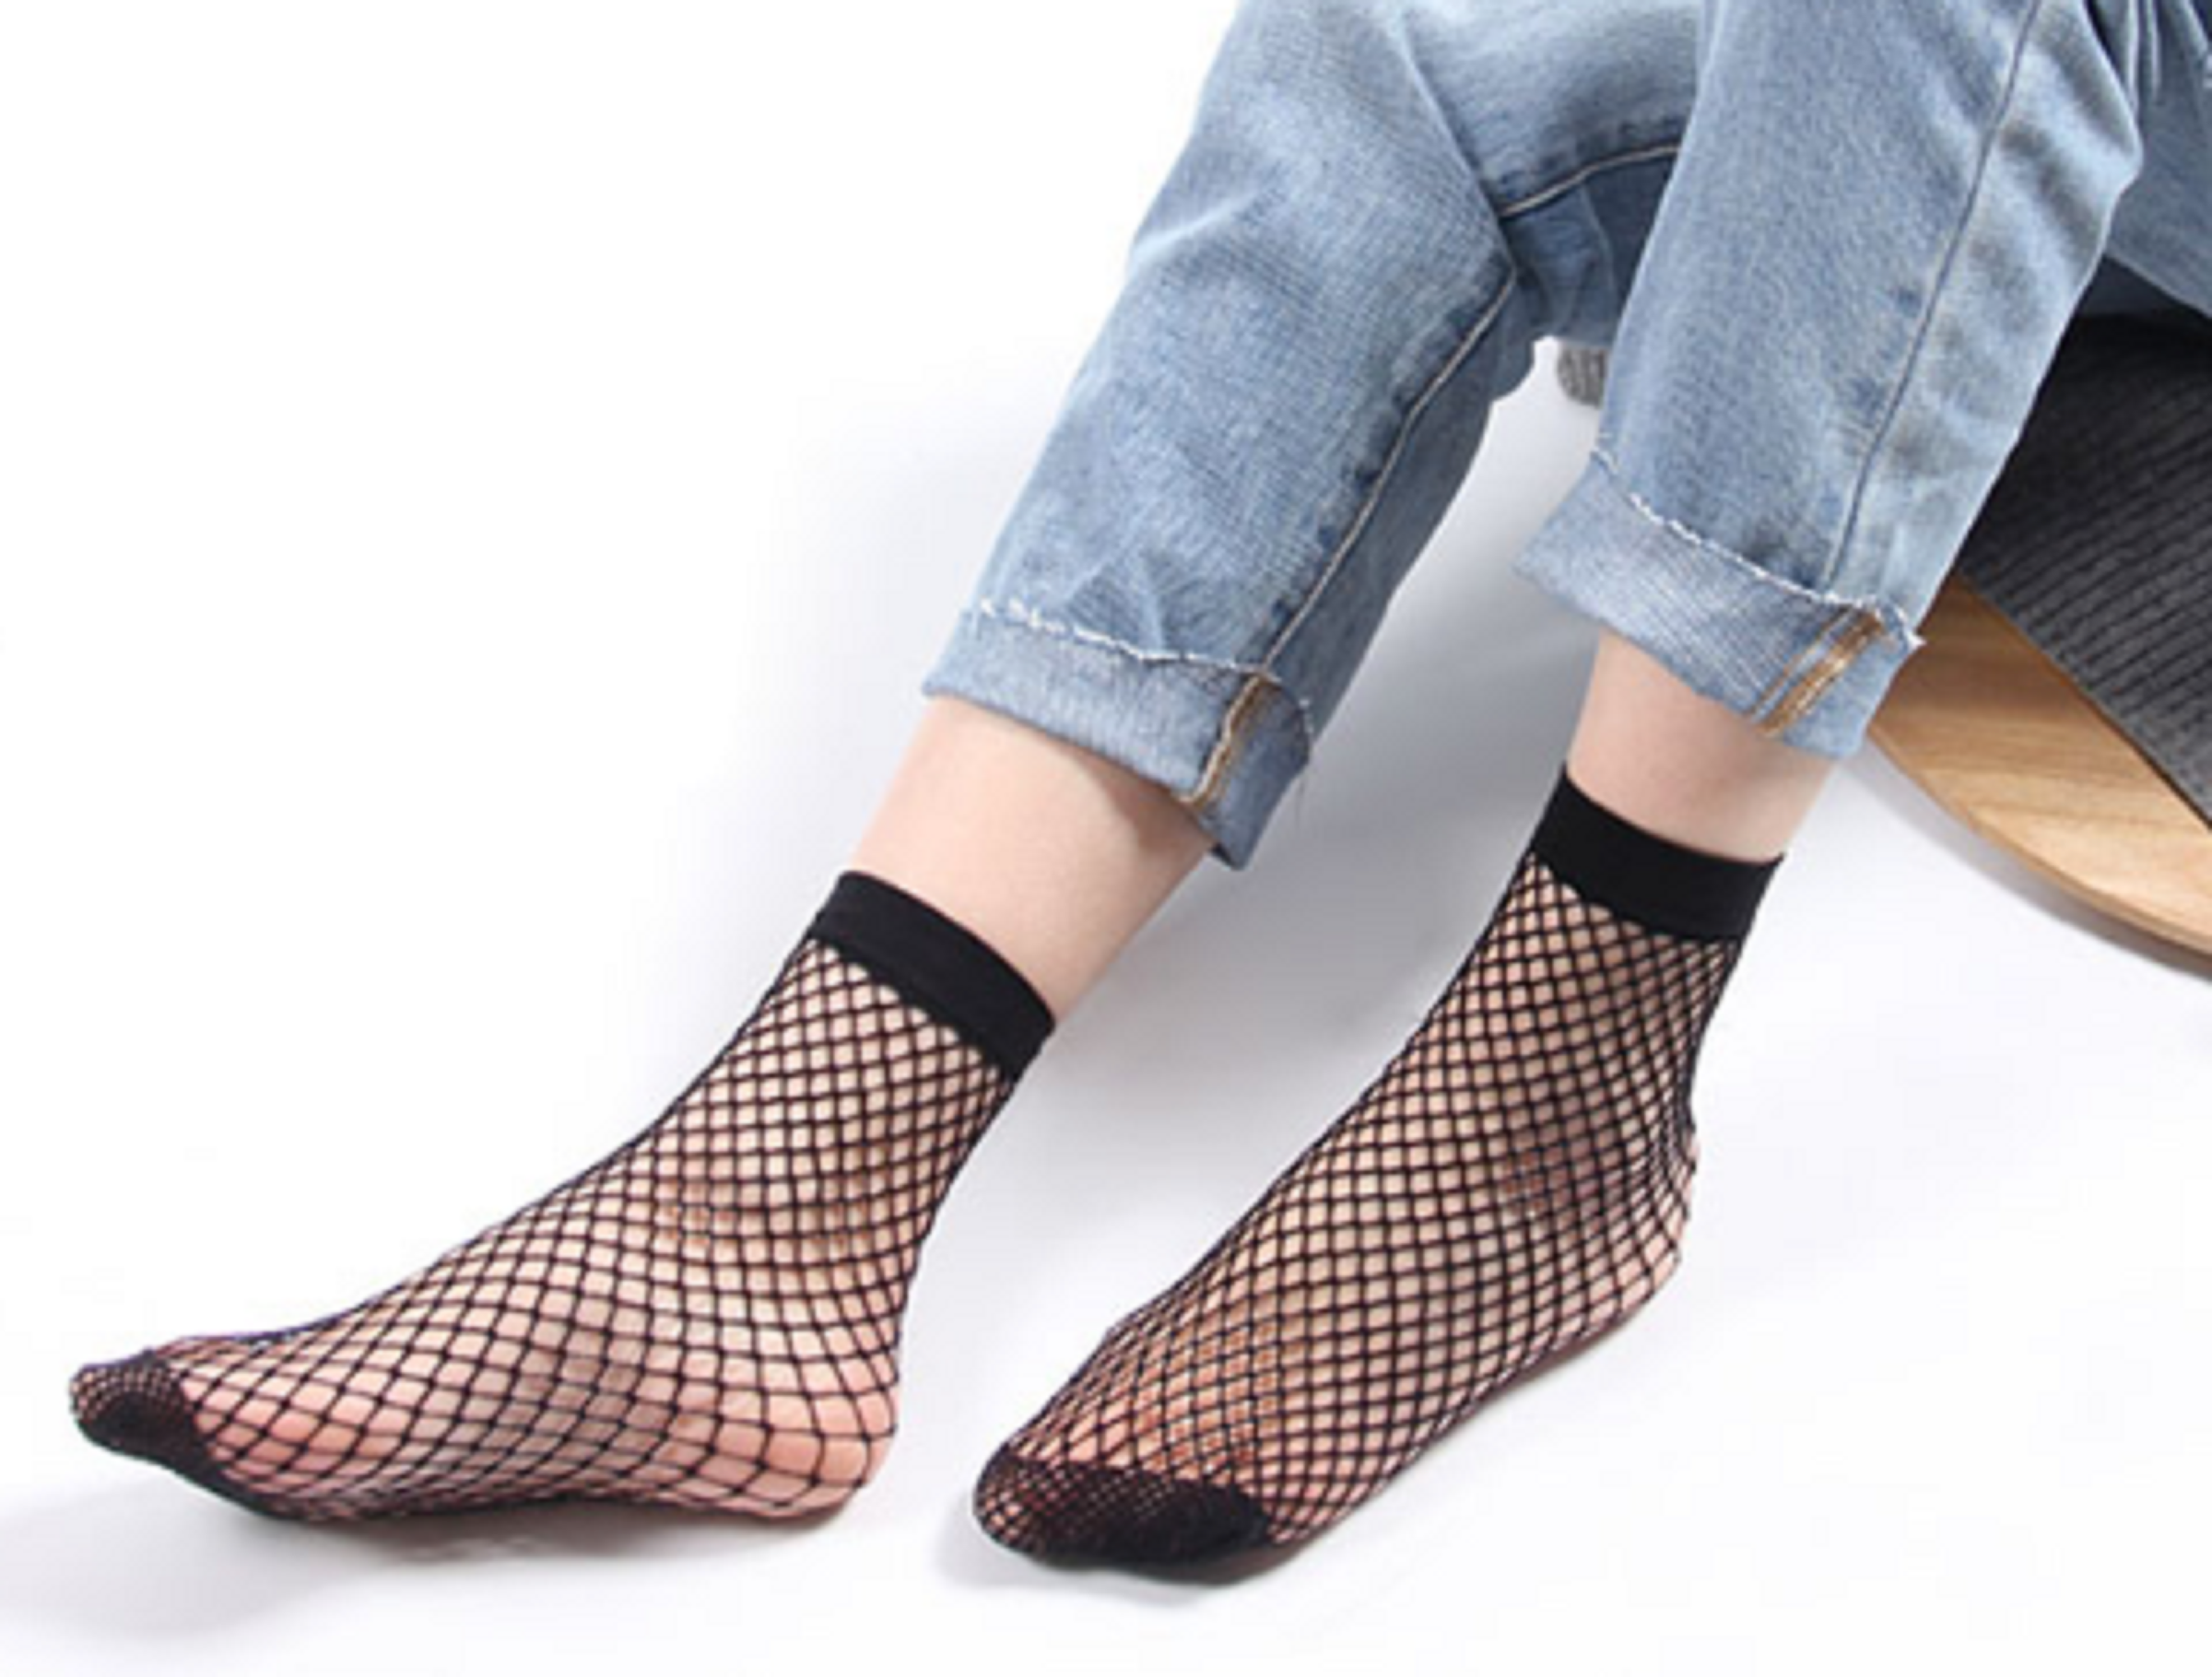 fishnet socks with trainers